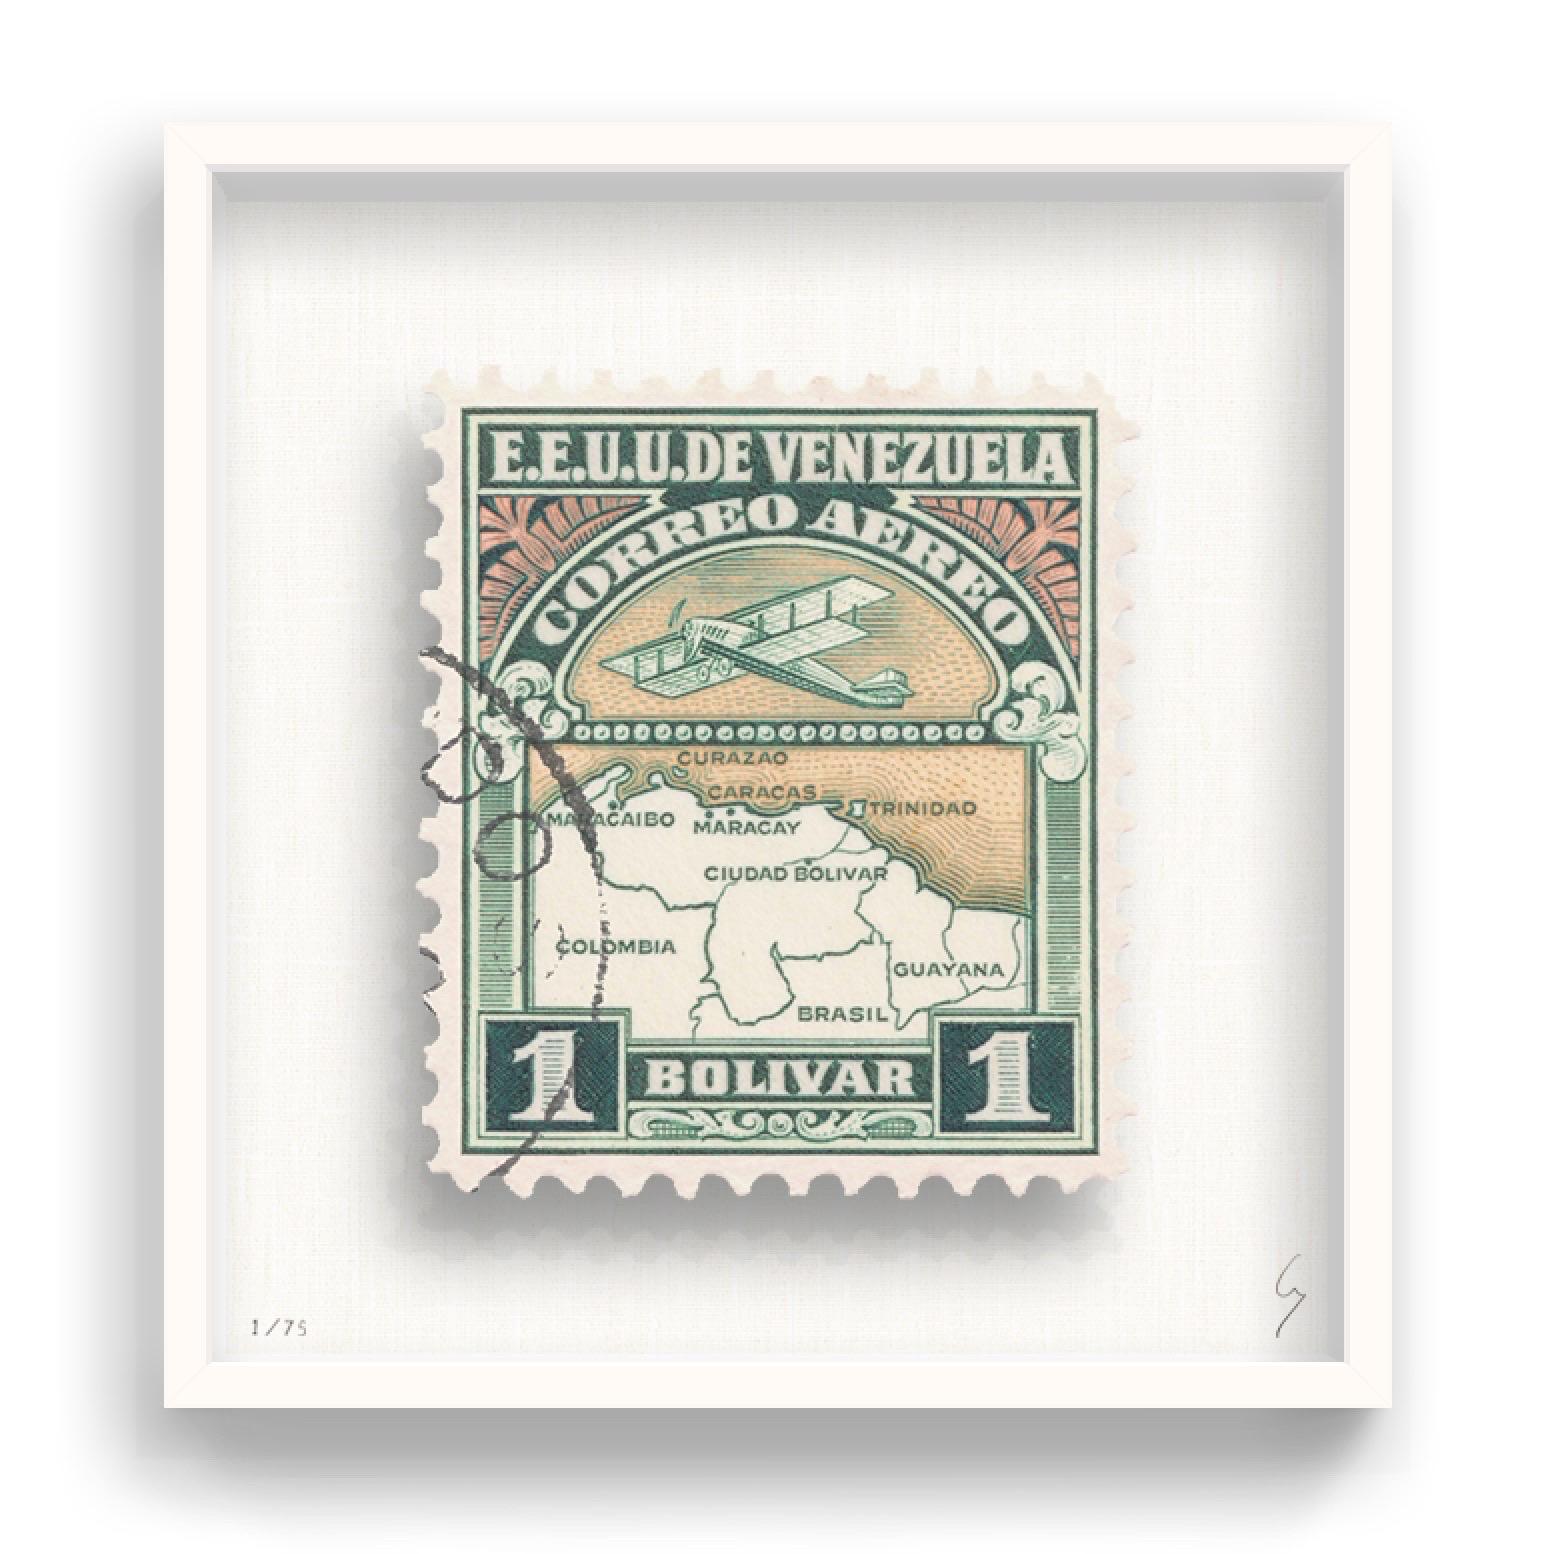 Guy Gee, Venezuela (medium)

Hand-engraved print on 350gsm on G.F Smith card
31 x 35 cm (12 1/5 x 13 4/5)
Frame included 
Edition of 75 

Each artwork by Guy had been digitally reimagined from an original postage stamp. Cut out and finished by hand,